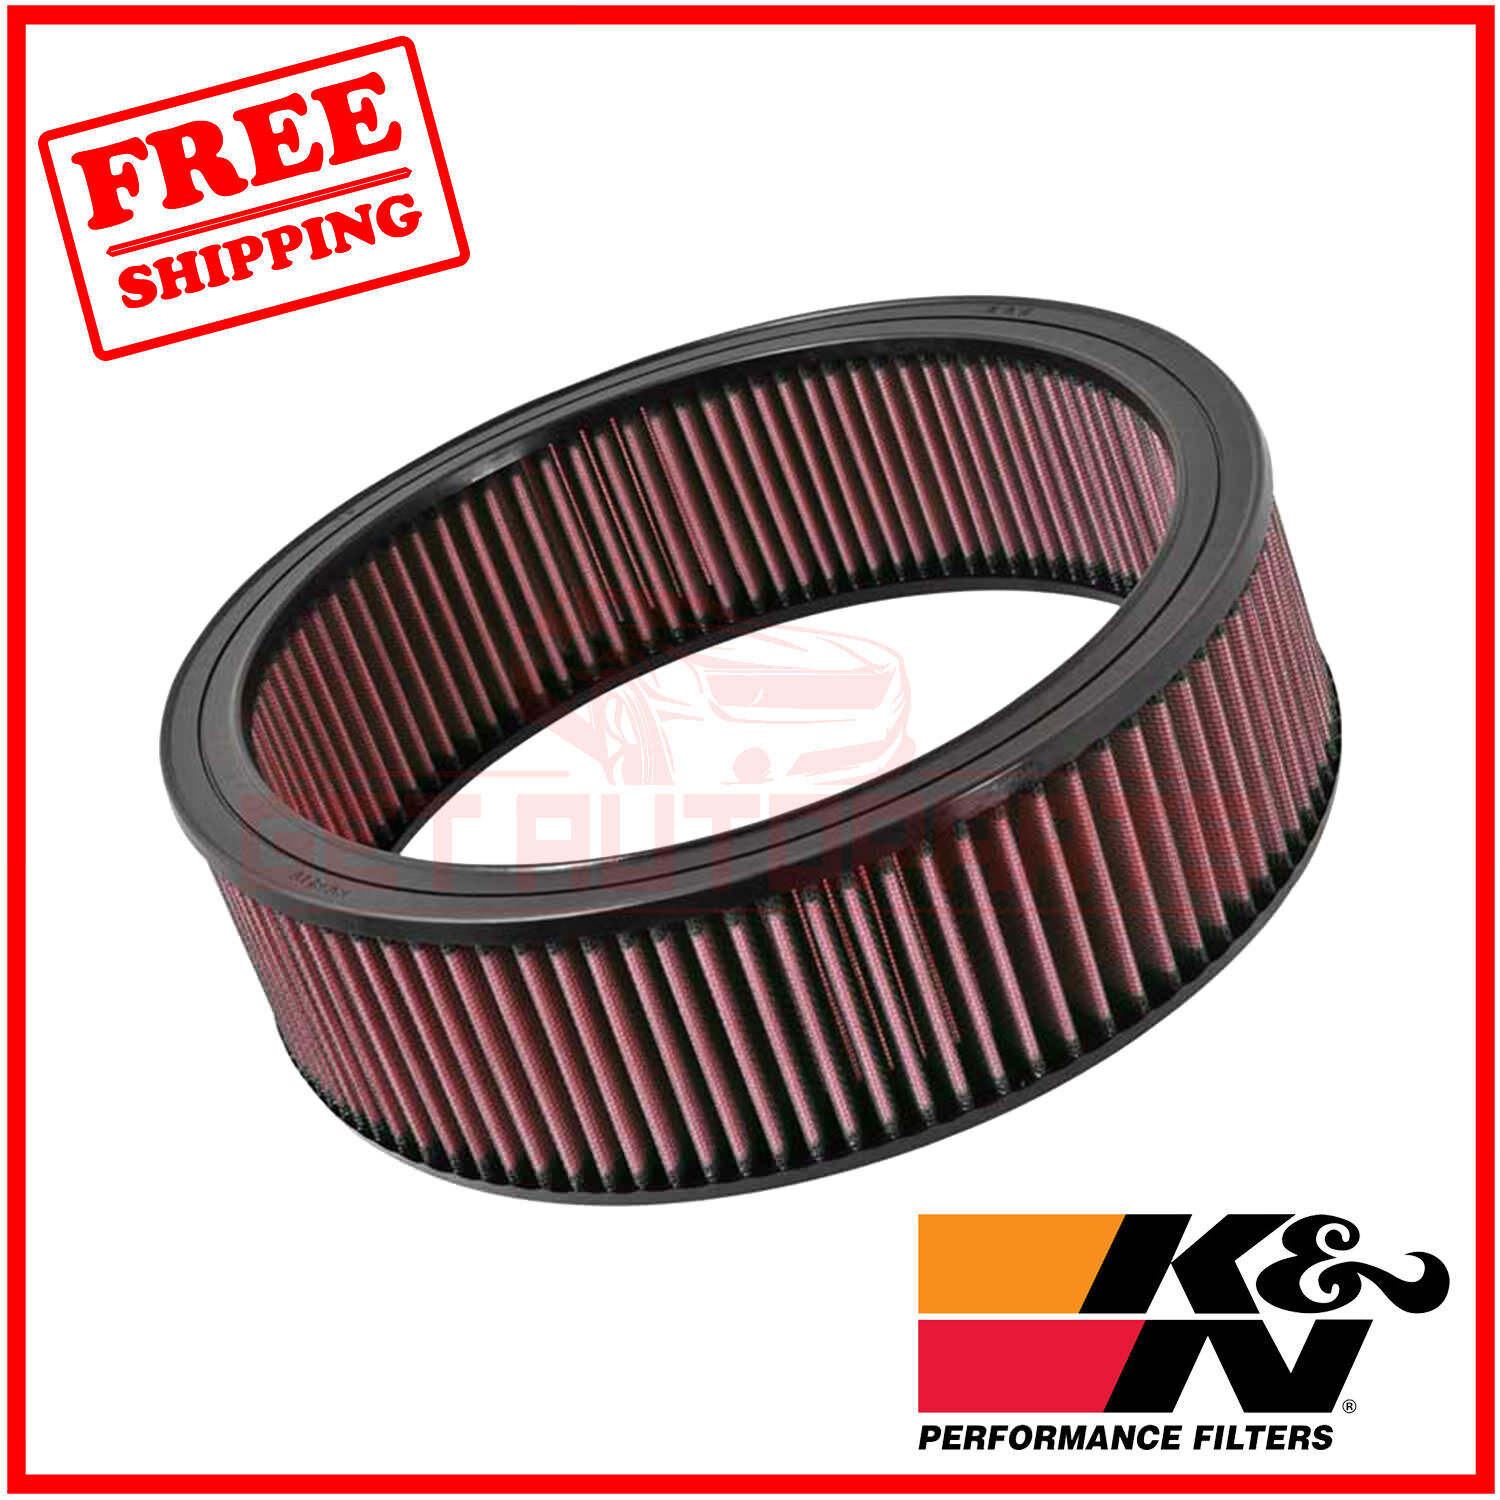 K&N Replacement Air Filter for Chevrolet Biscayne 1968-1972